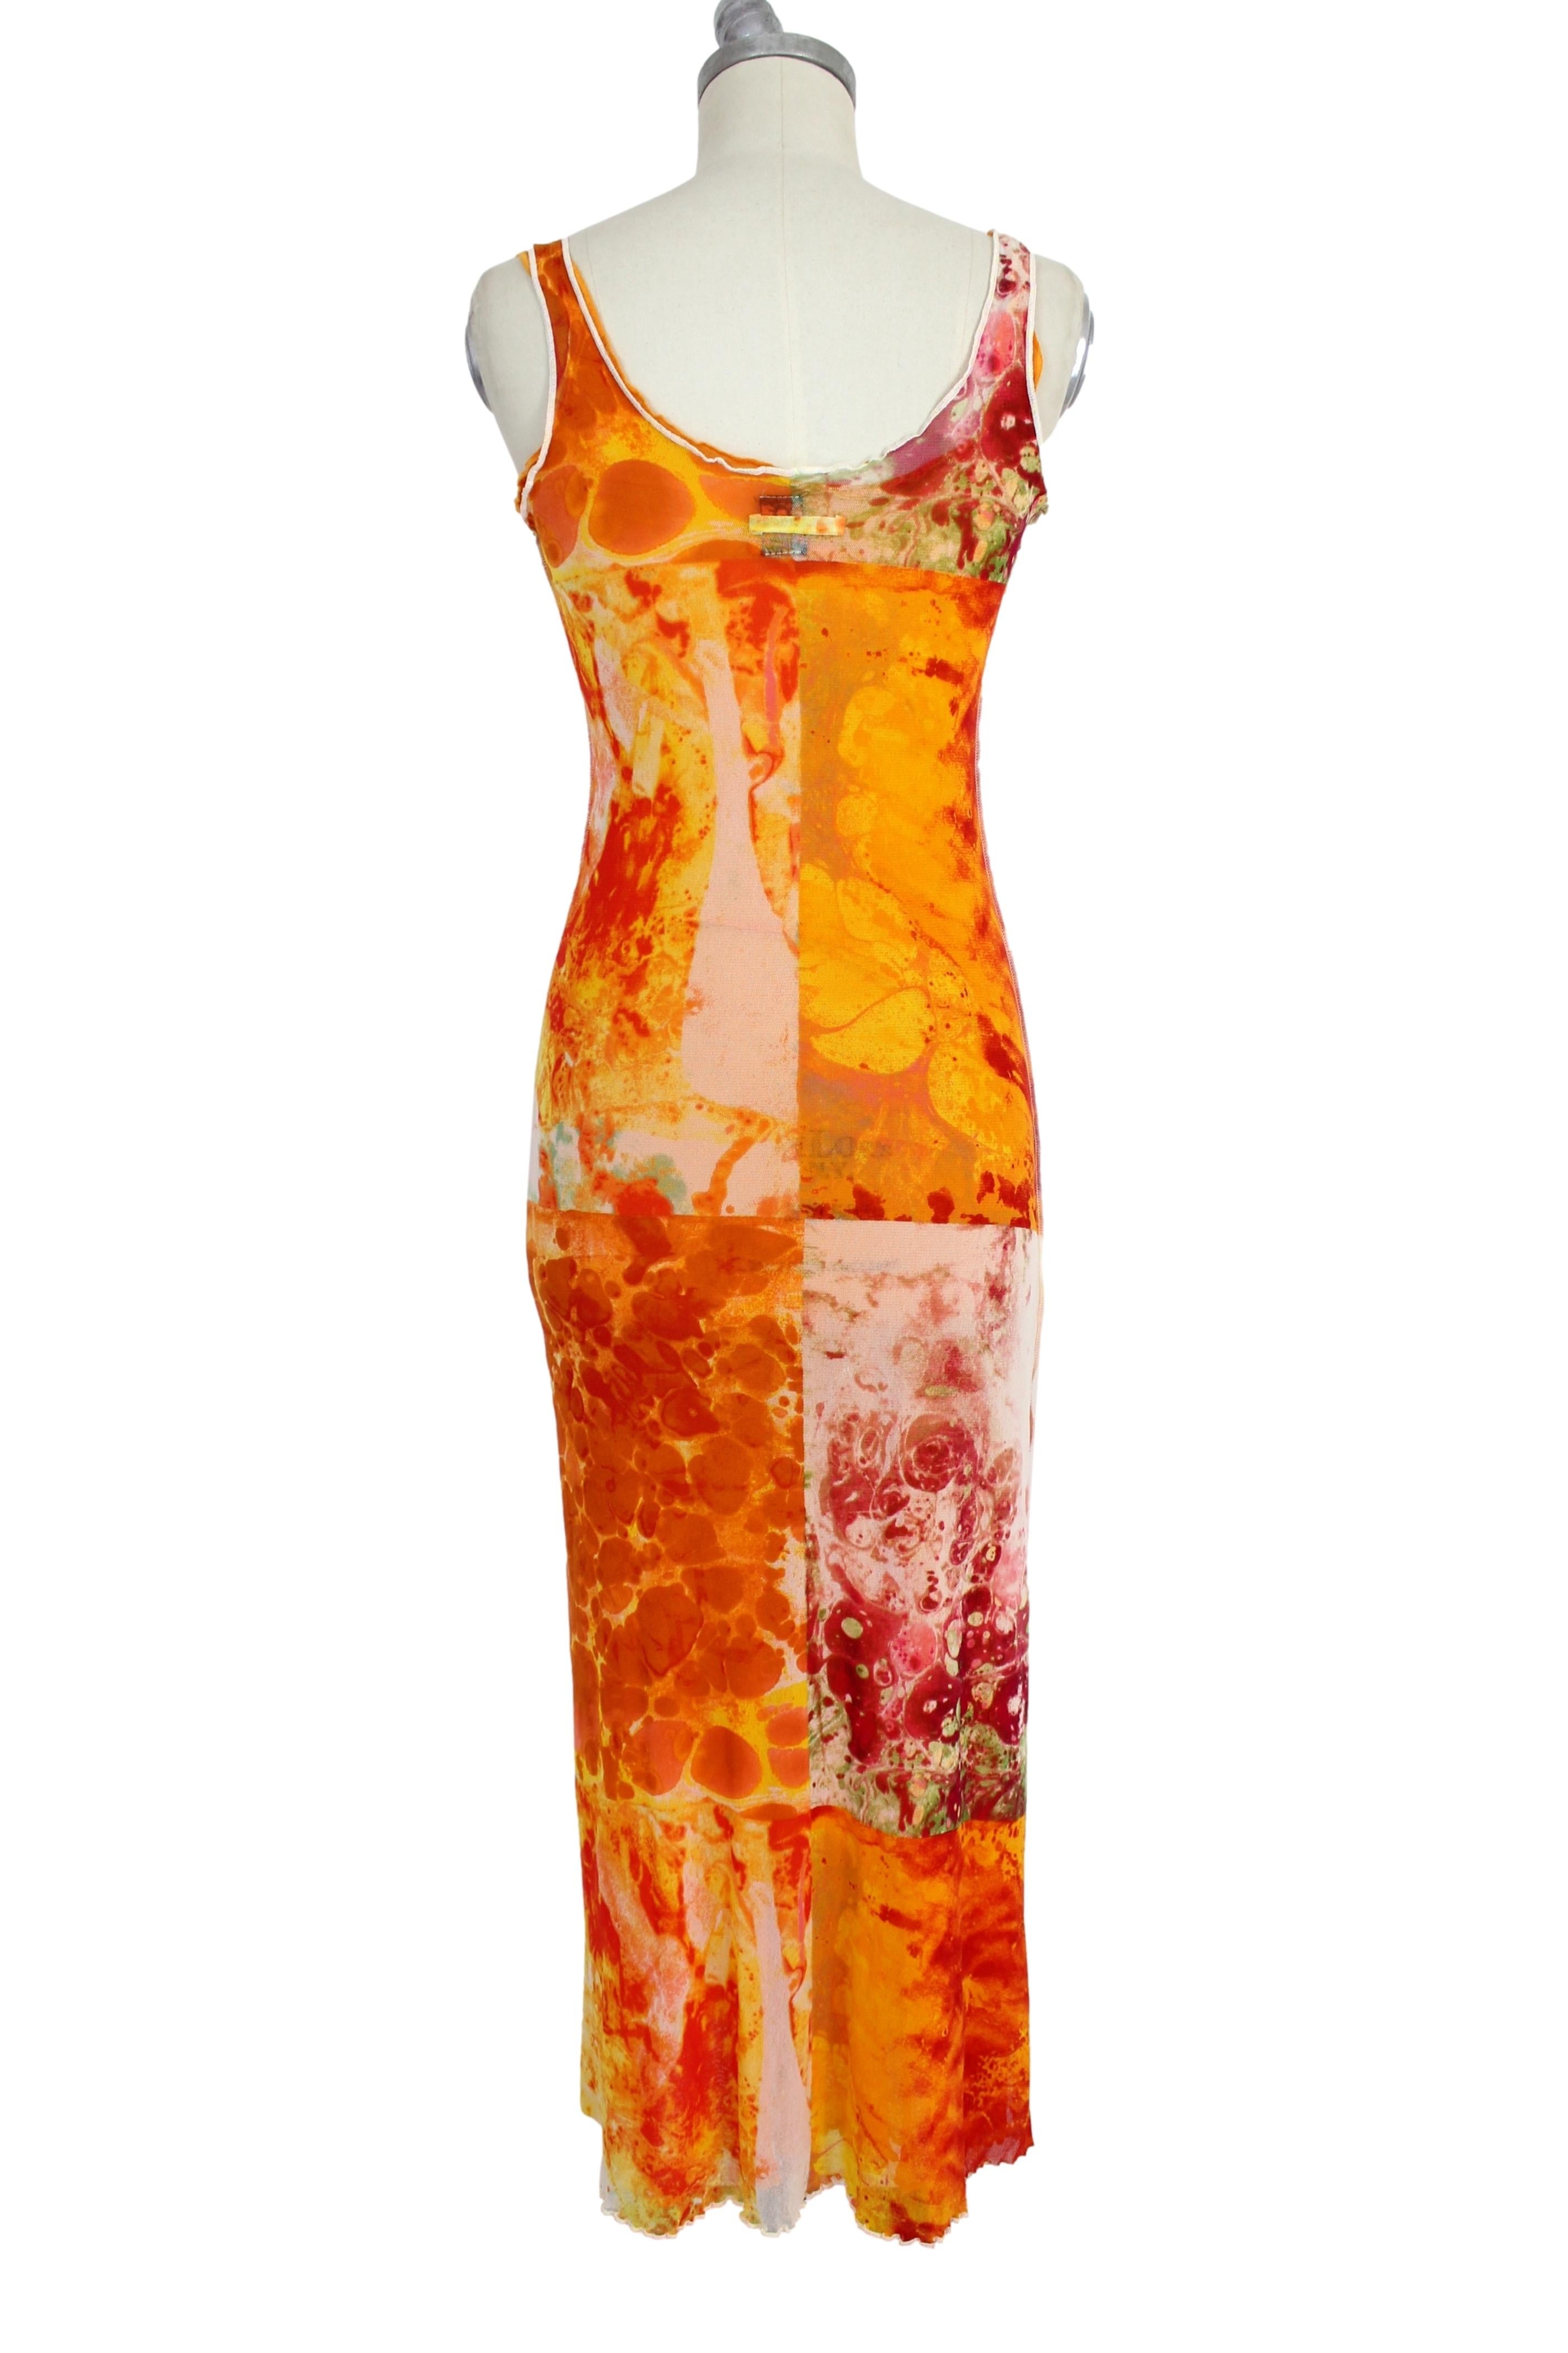 Jean Paul Gaultier Soleil vintage 90s dress. Long dress, fitted model. The dress consists of an orange petticoat and an orange transparent dress with floral designs in shades of green and pink. Polyester fabric. Made in Italy.

Condition: